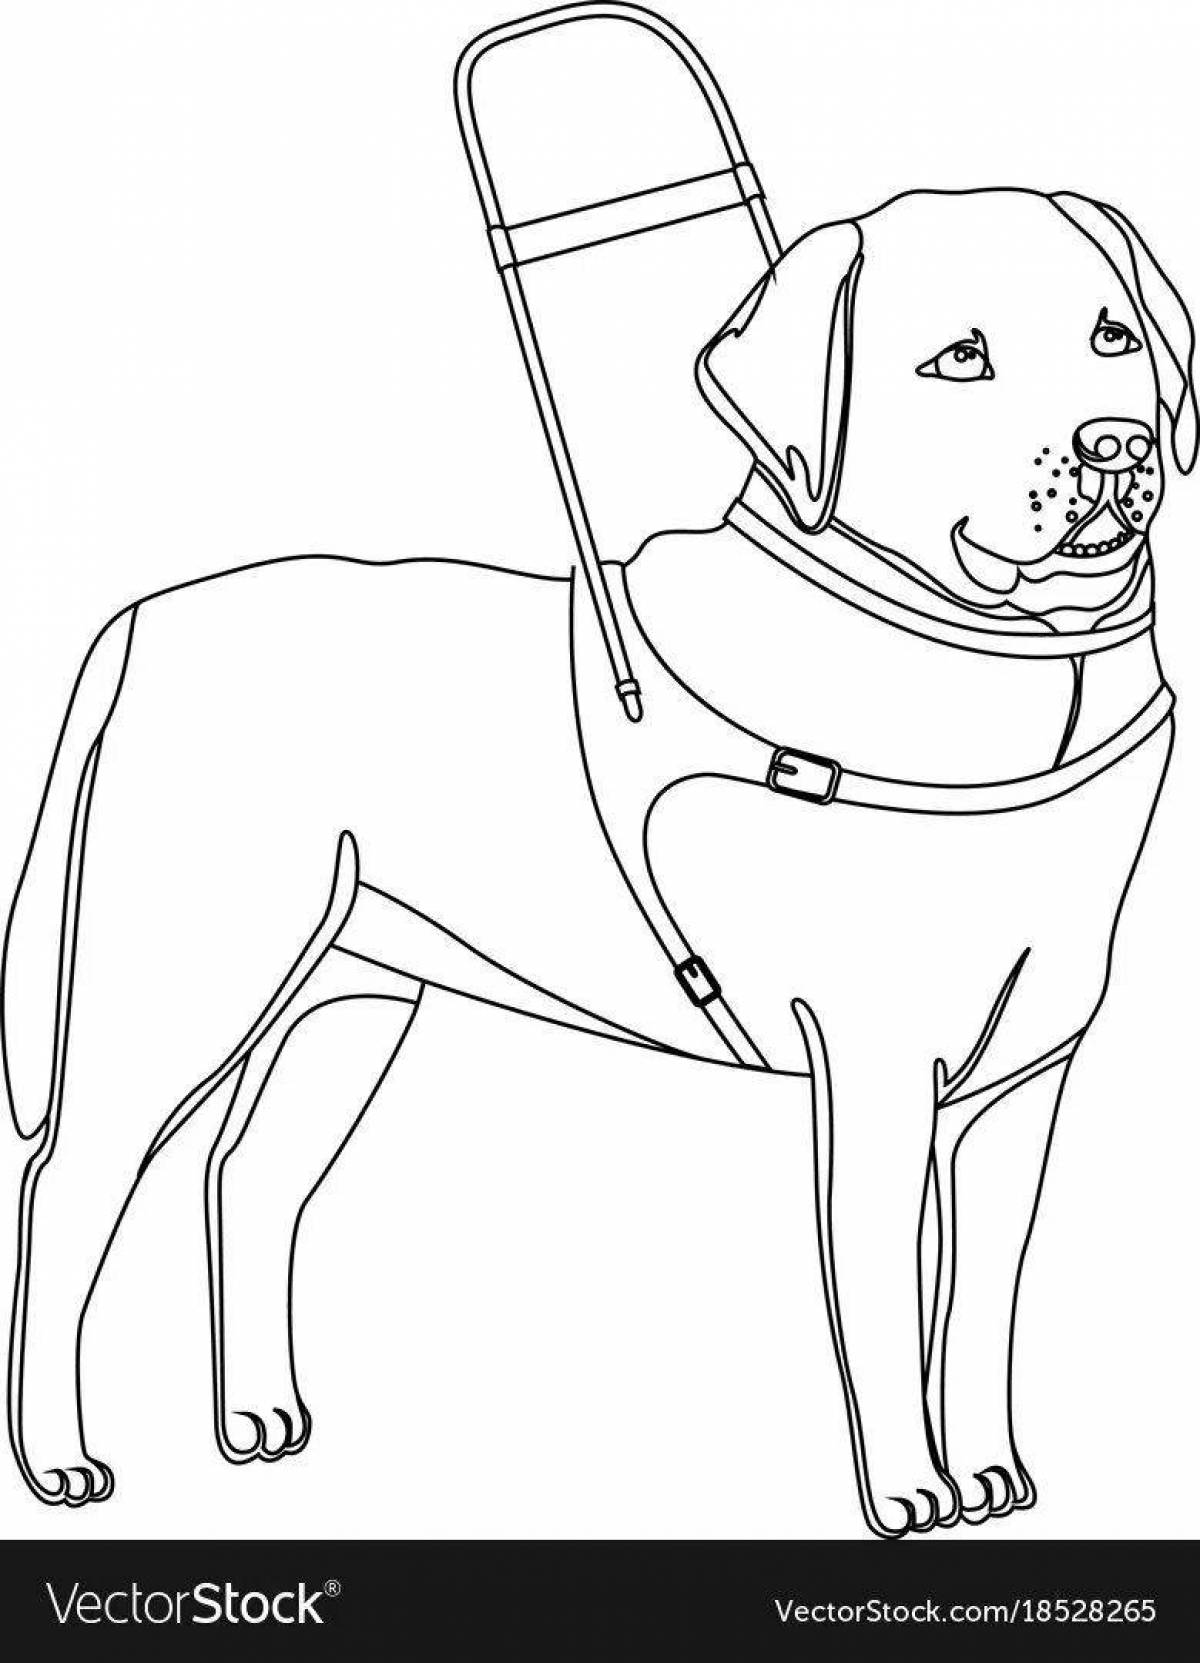 Coloring pages happy service dogs for kids